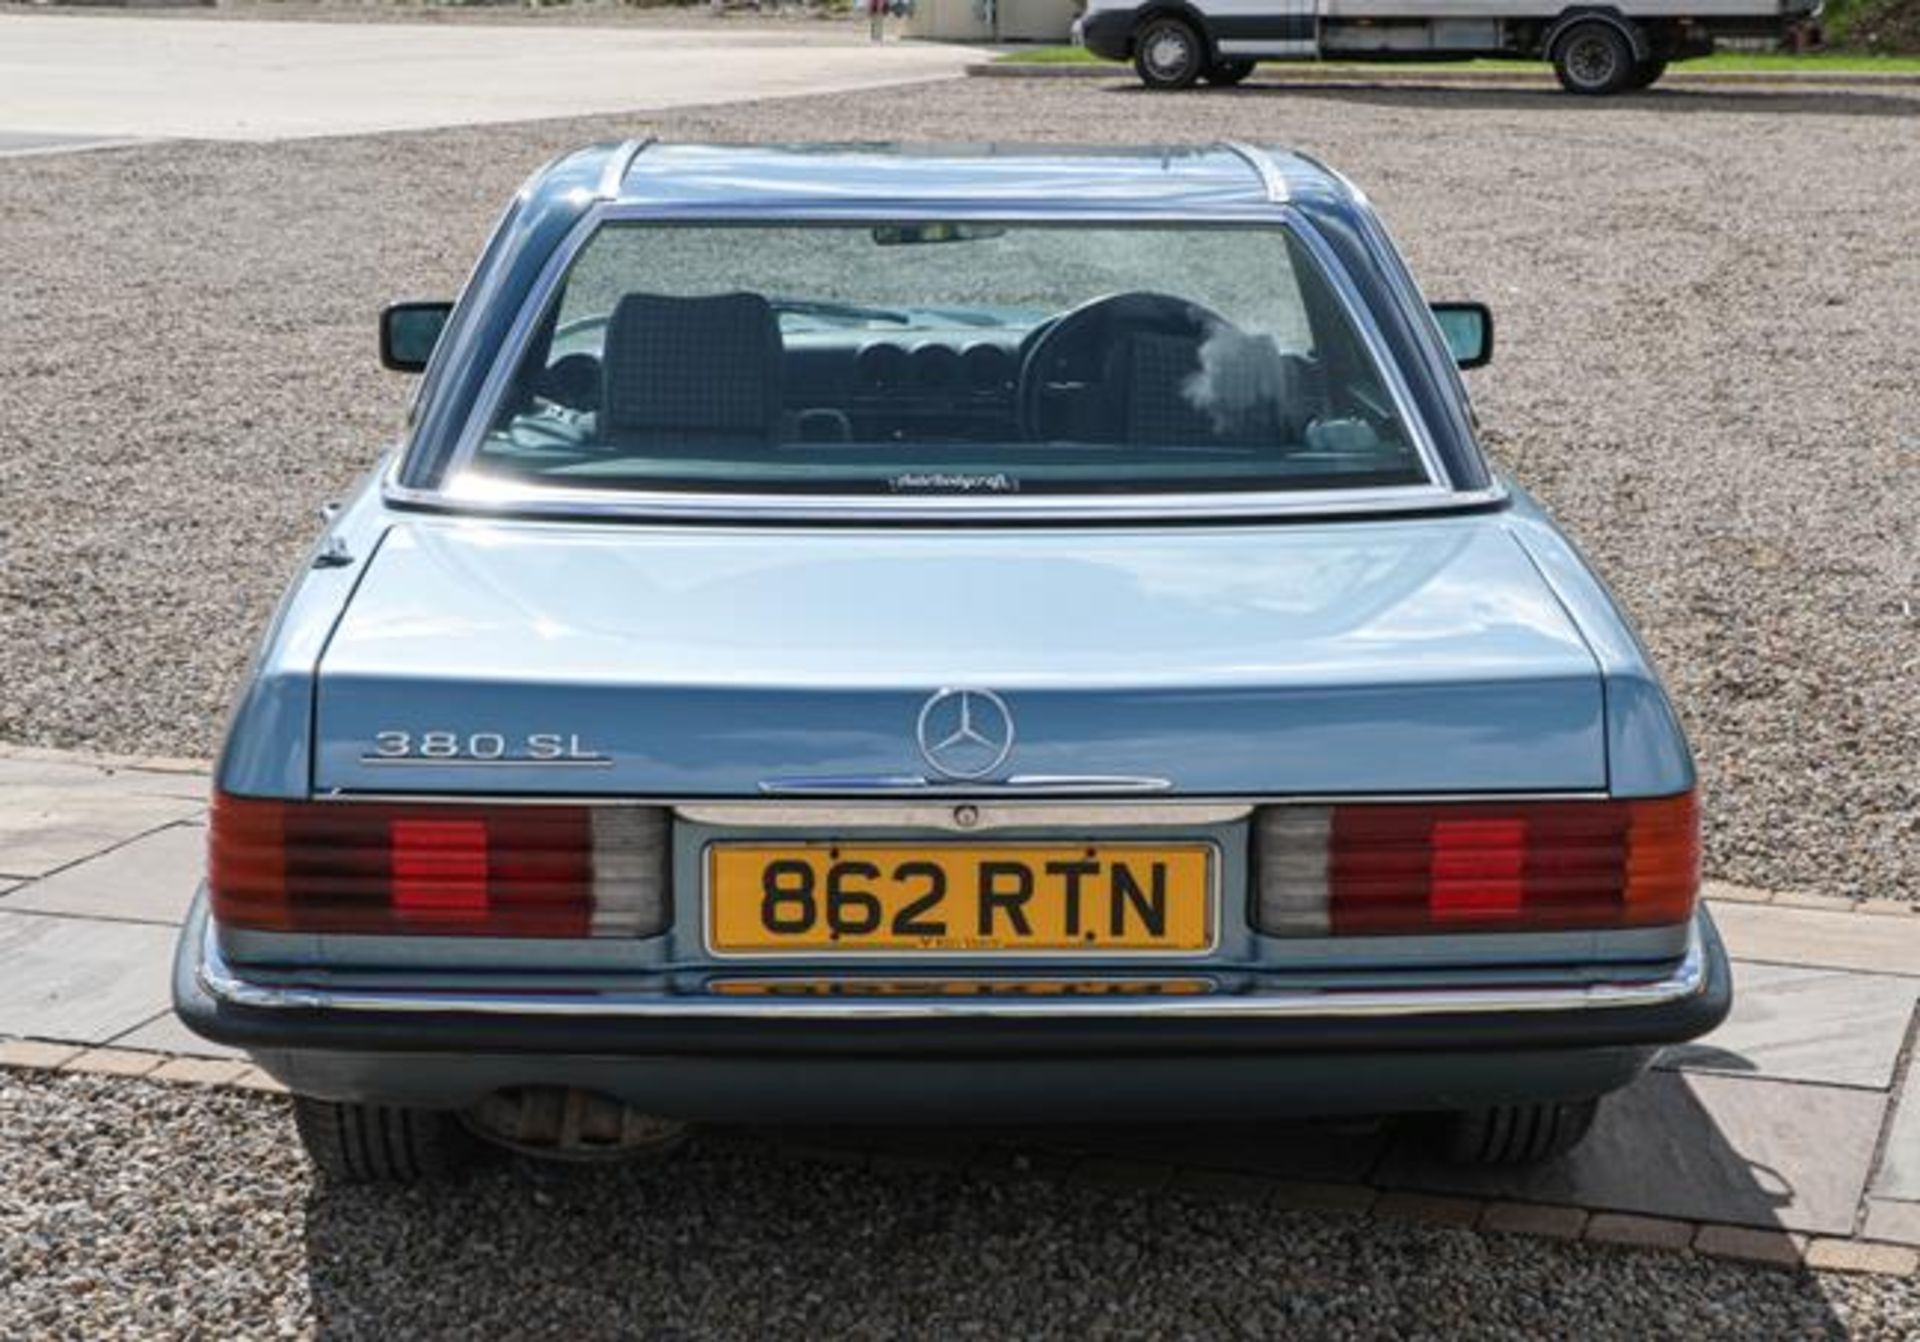 1985 Mercedes 380-SL Auto Convertible Registration number: 862 RTN Date of first registration: 03 01 - Image 4 of 5